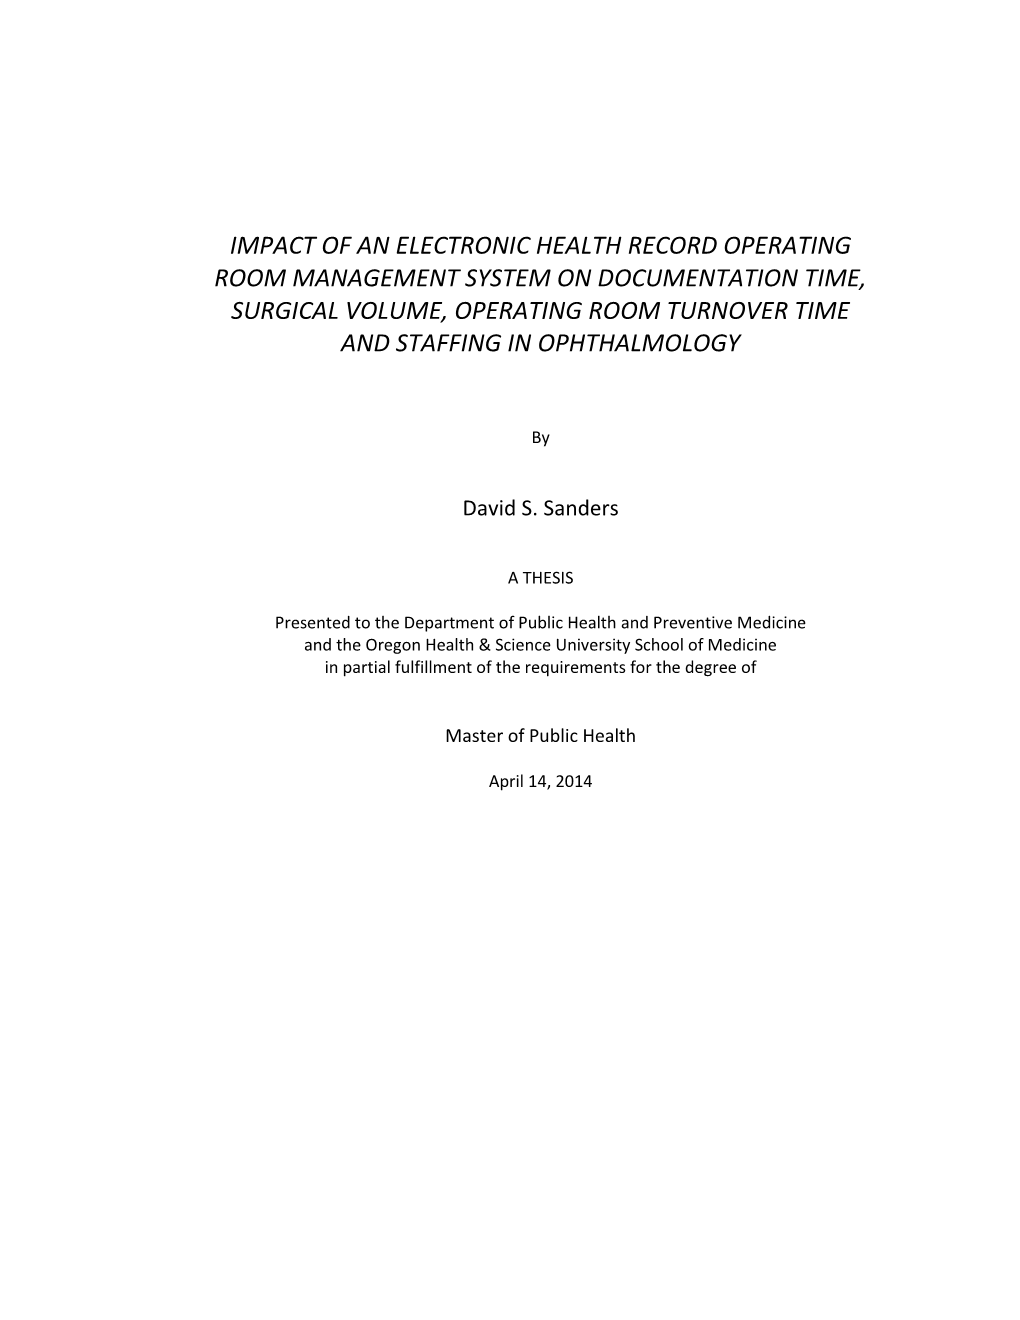 Impact of an Electronic Health Record Operating Room Management System on Documentation Time, Surgical Volume, Operating Room Tu